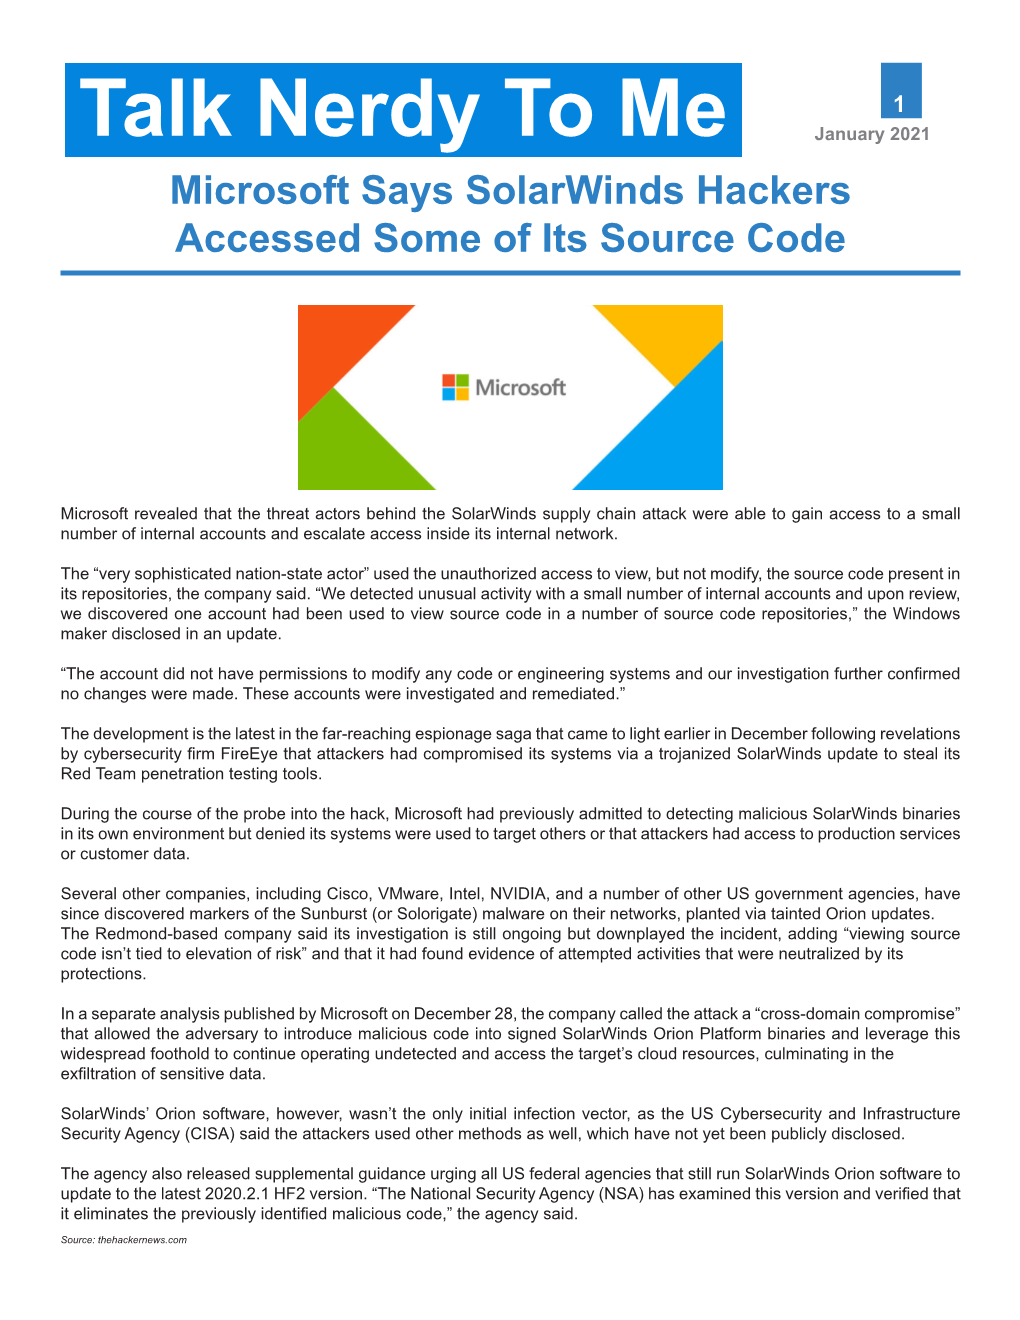 Talk Nerdy to Me January 2021 Microsoft Says Solarwinds Hackers Accessed Some of Its Source Code